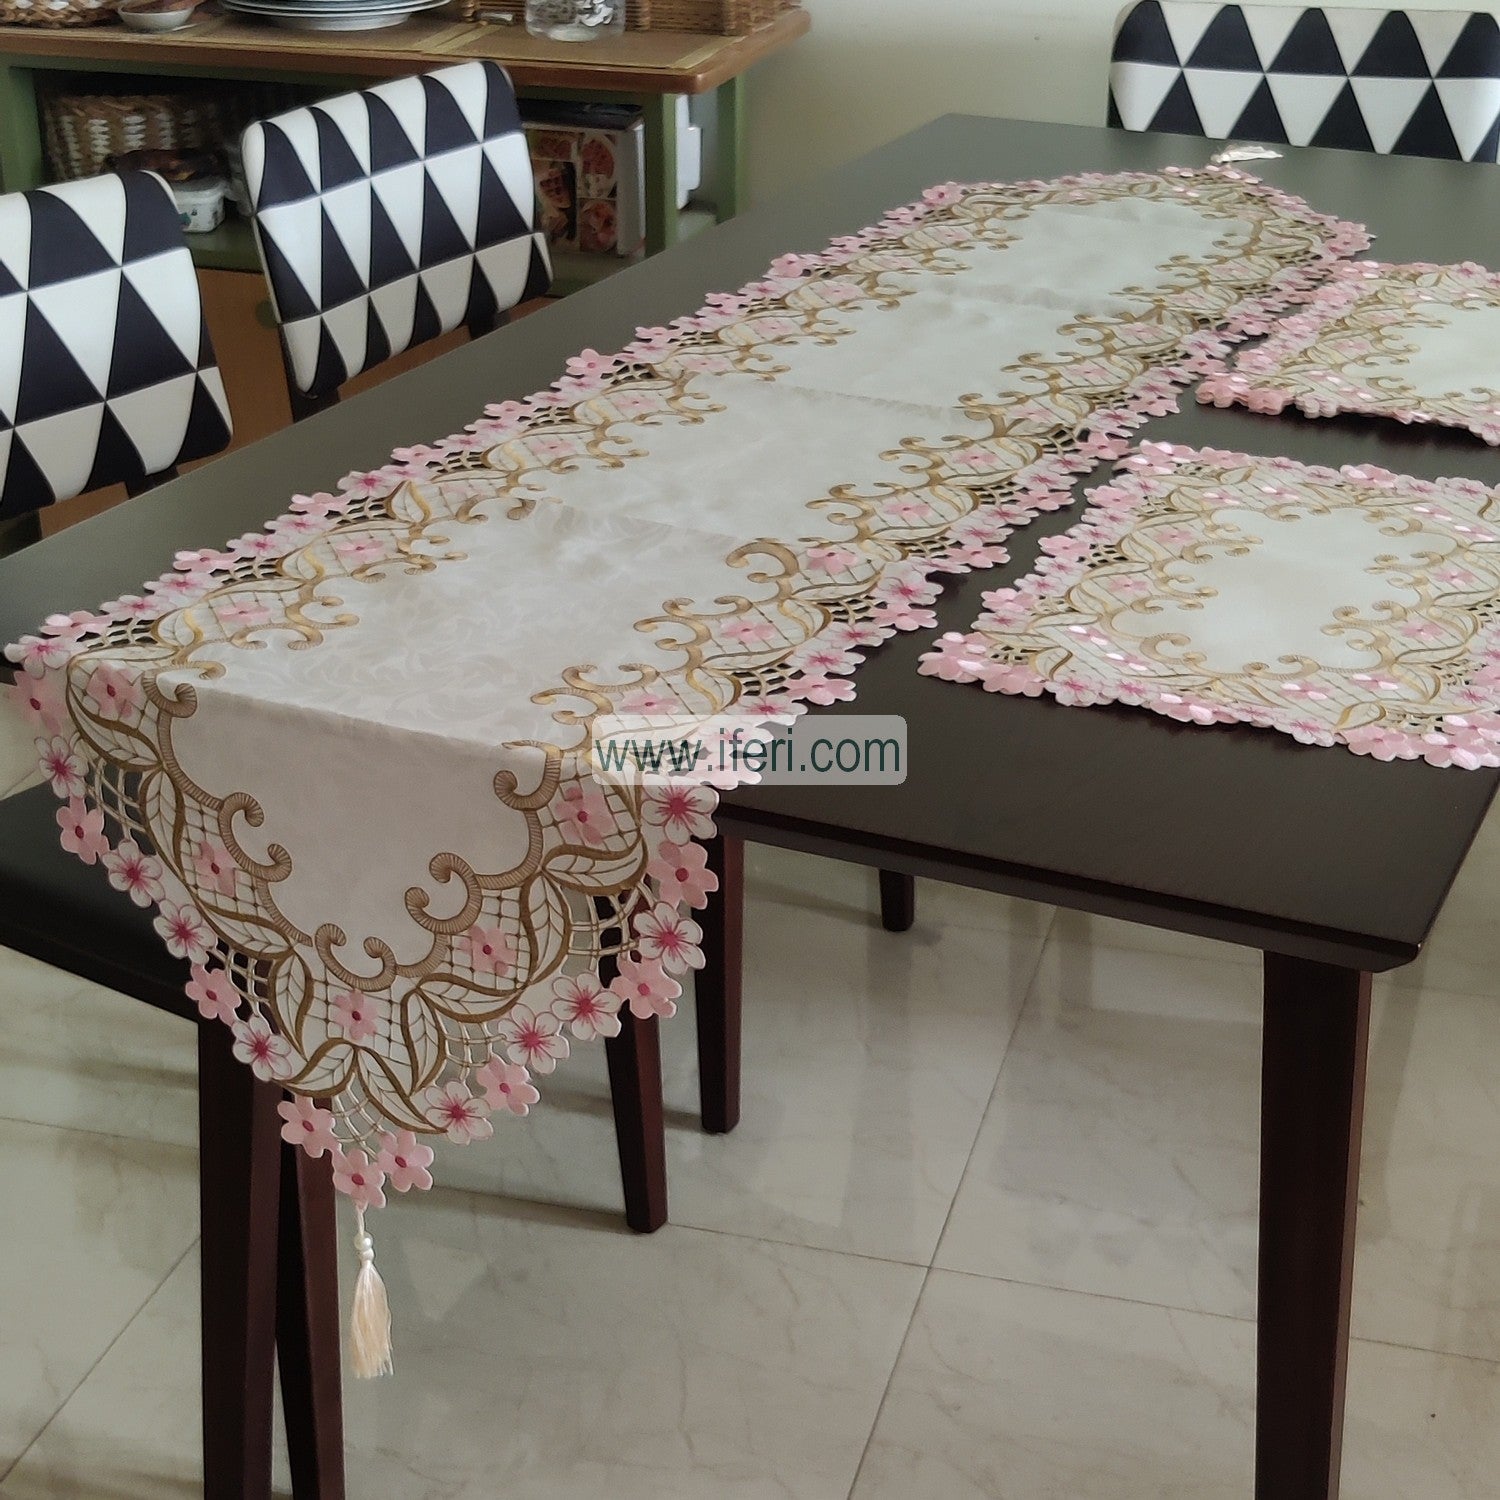 7pcs Luxury Embroidered Lace Runner & Placemats Set RJ148759